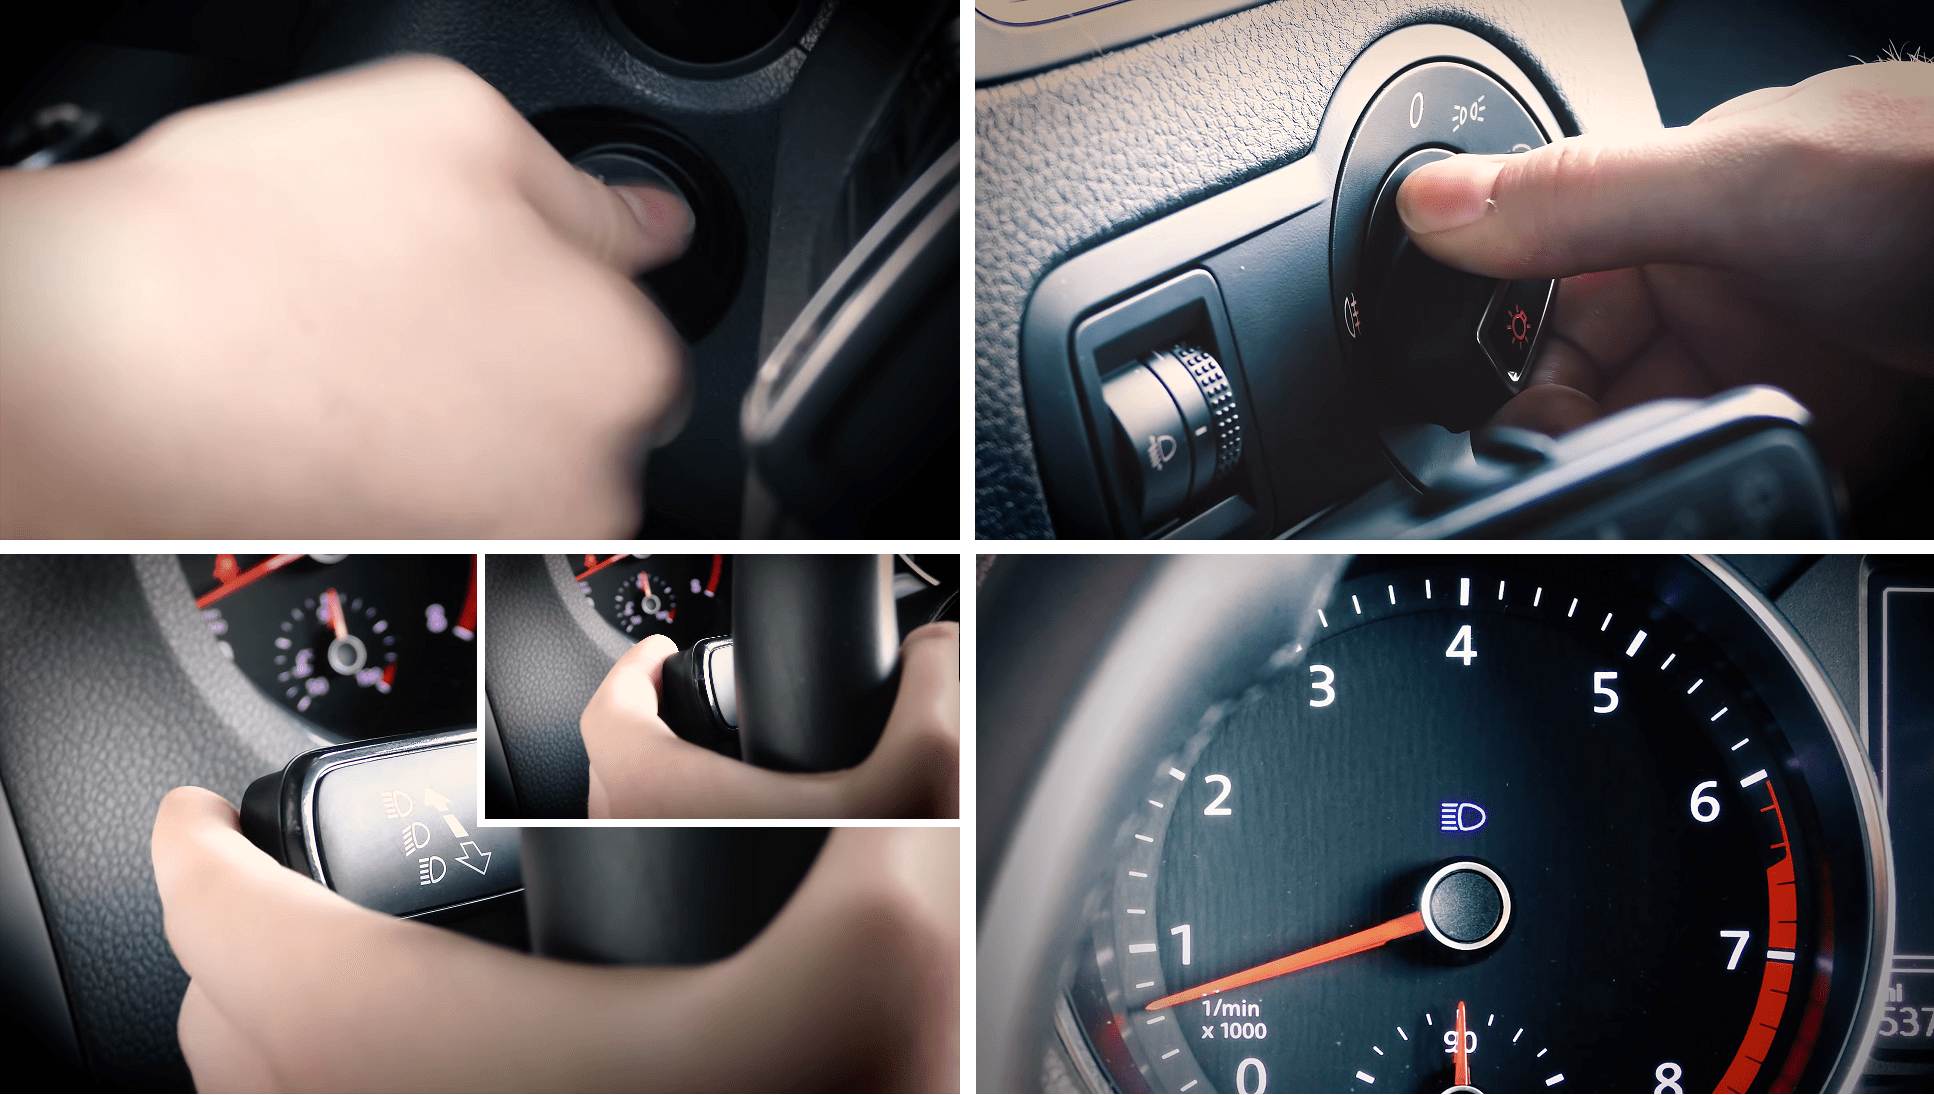 A consolidated guide within a single image, featuring four sequentially arranged images (1, 2, 3, 4) with white borders. The visual instructions provide a step-by-step demonstration on how to transition headlights from dipped to main beam and utilize the dashboard indicators to confirm their status for optimal visibility.